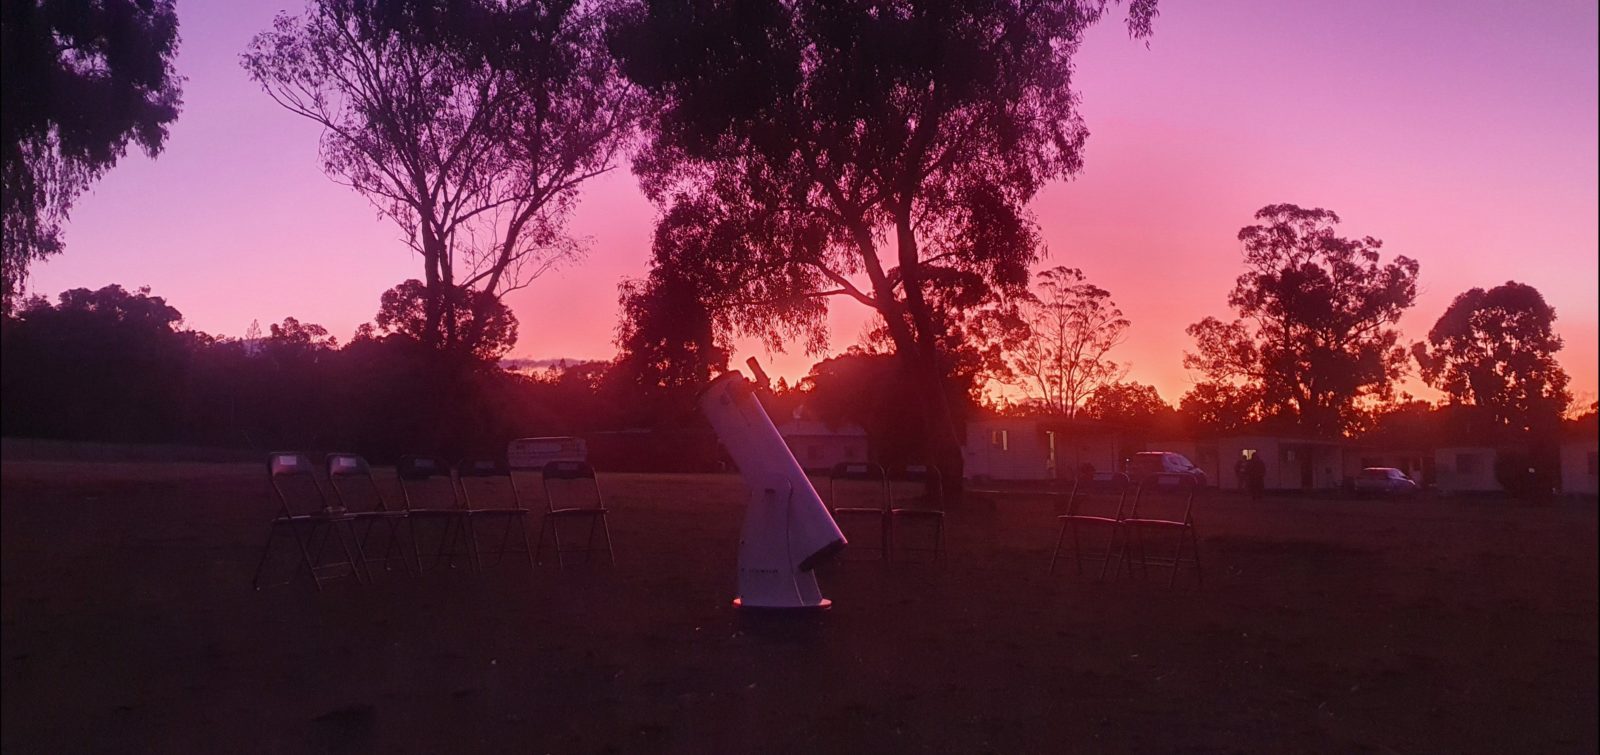 Telescope surrounded by chairs with sunset in the background, through the trees